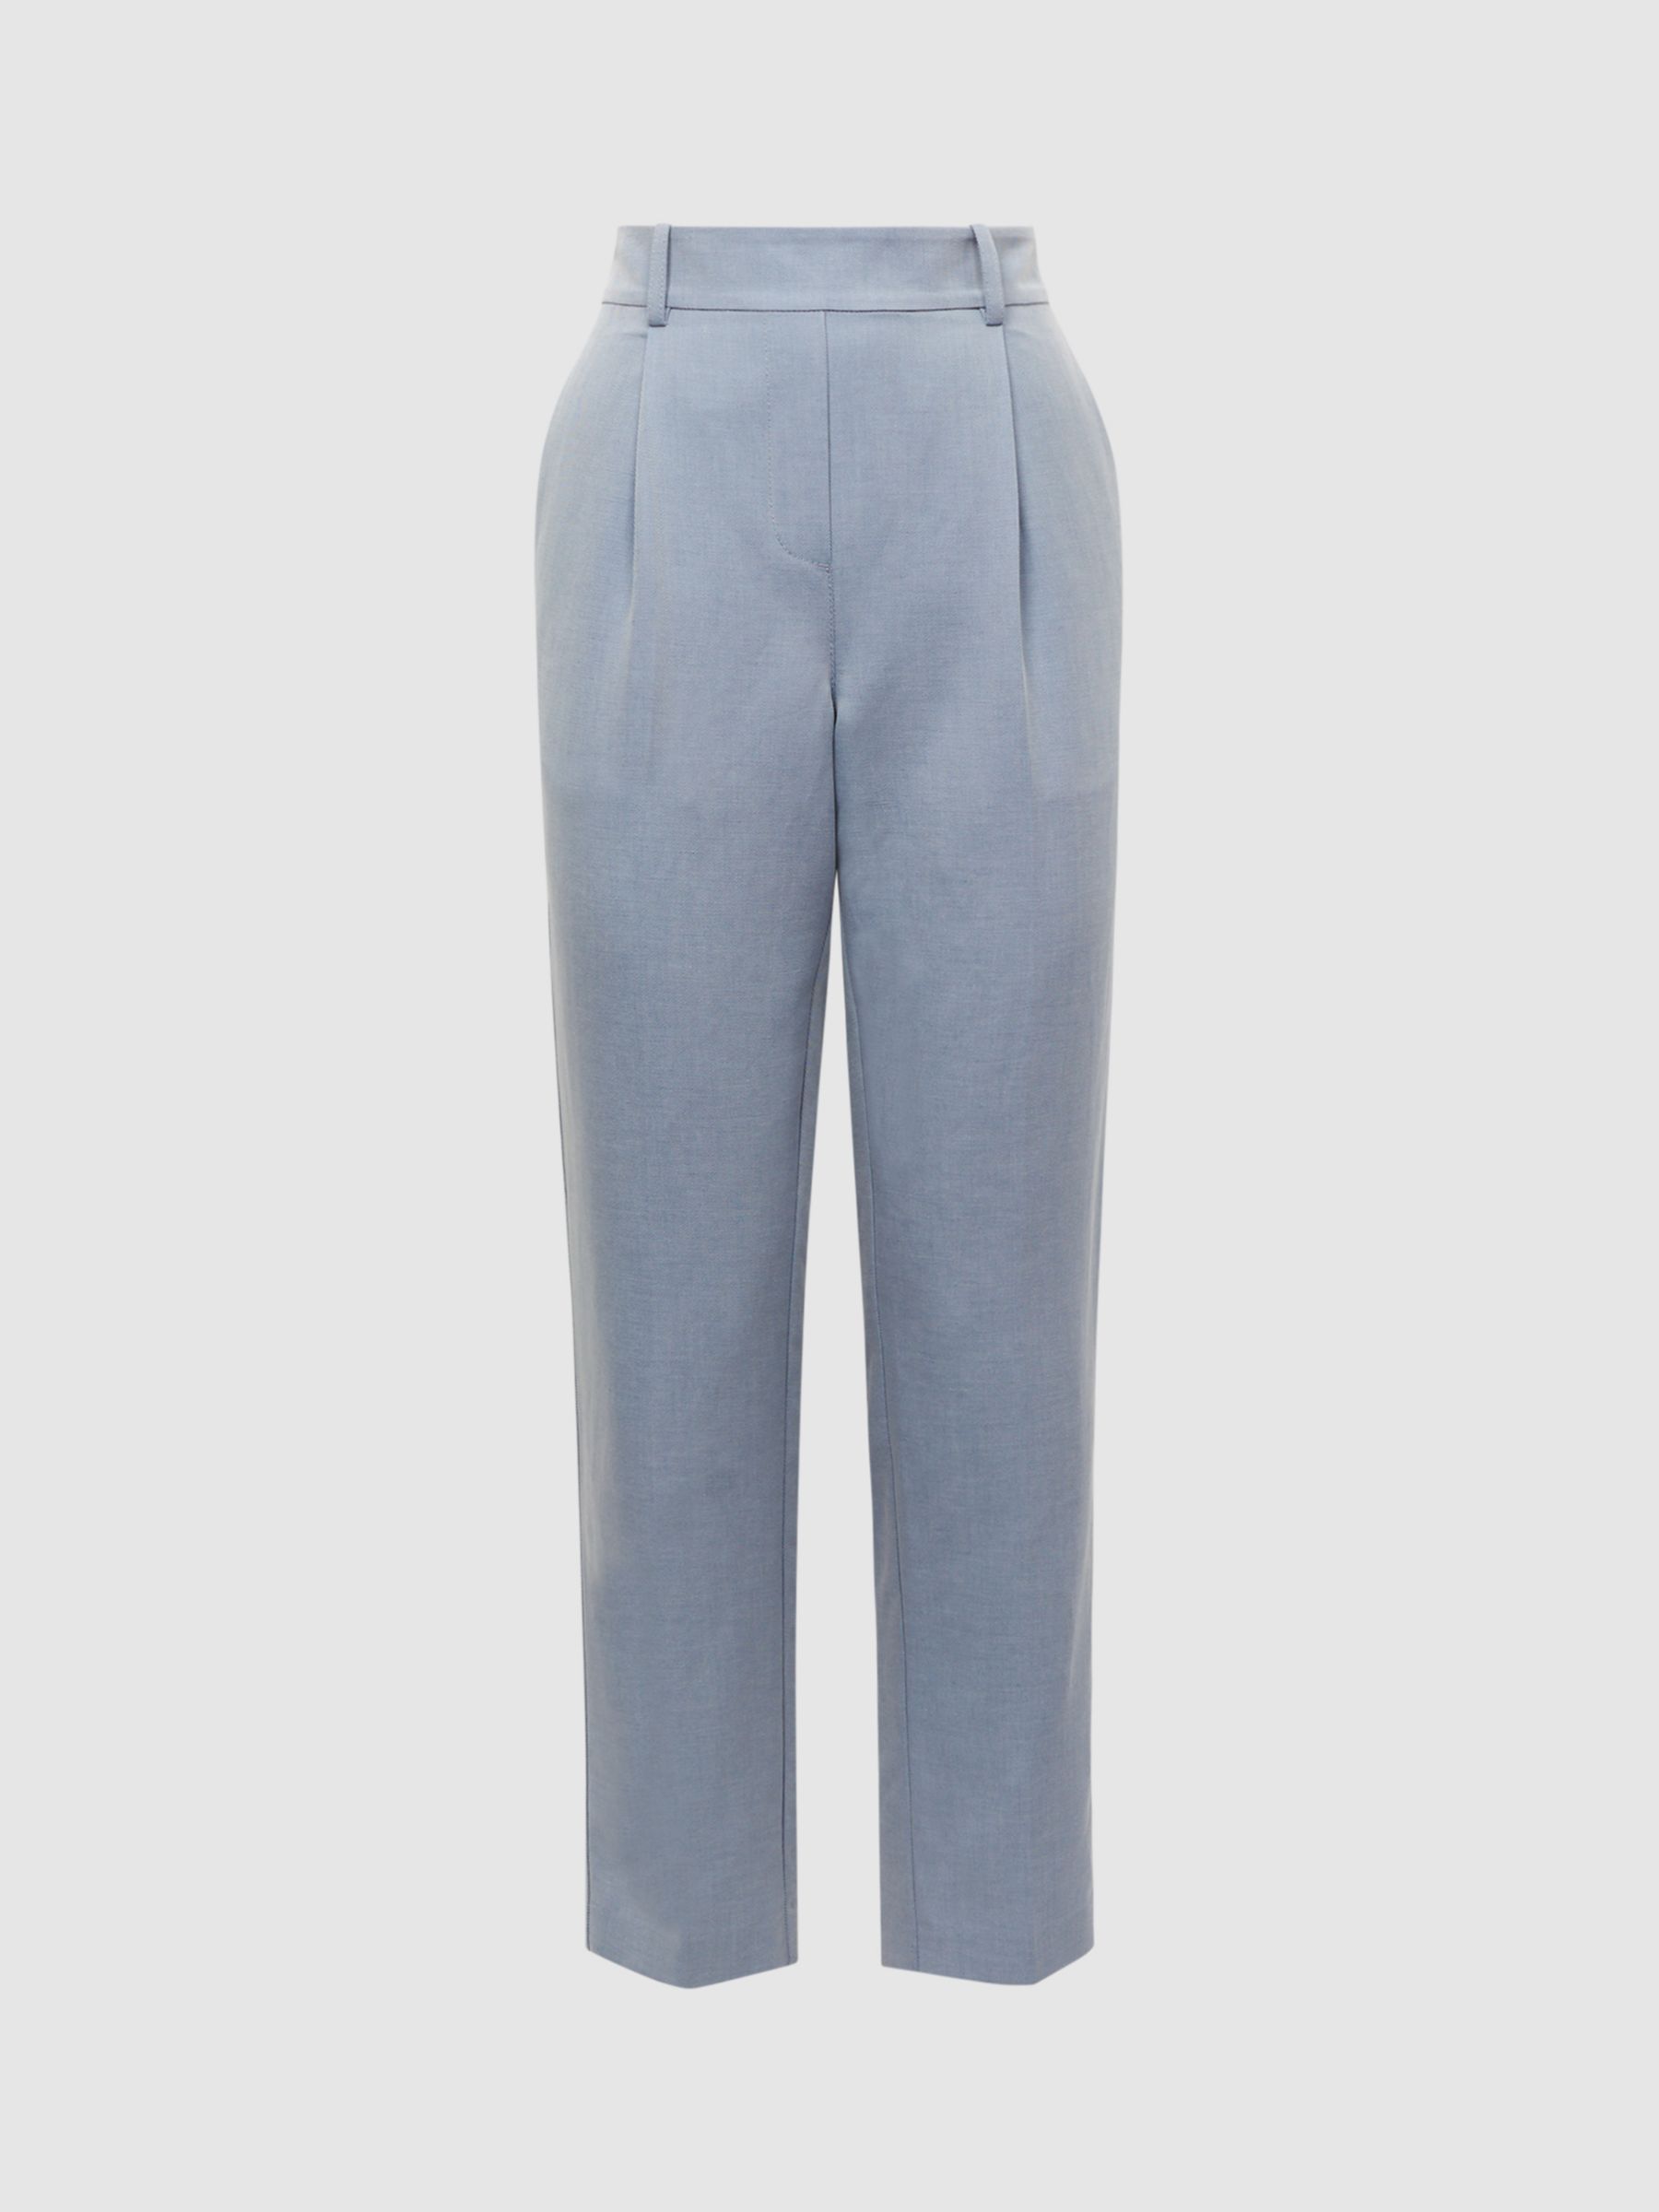 Reiss Shae Tapered Linen Blend Trousers, Pale Blue at John Lewis & Partners